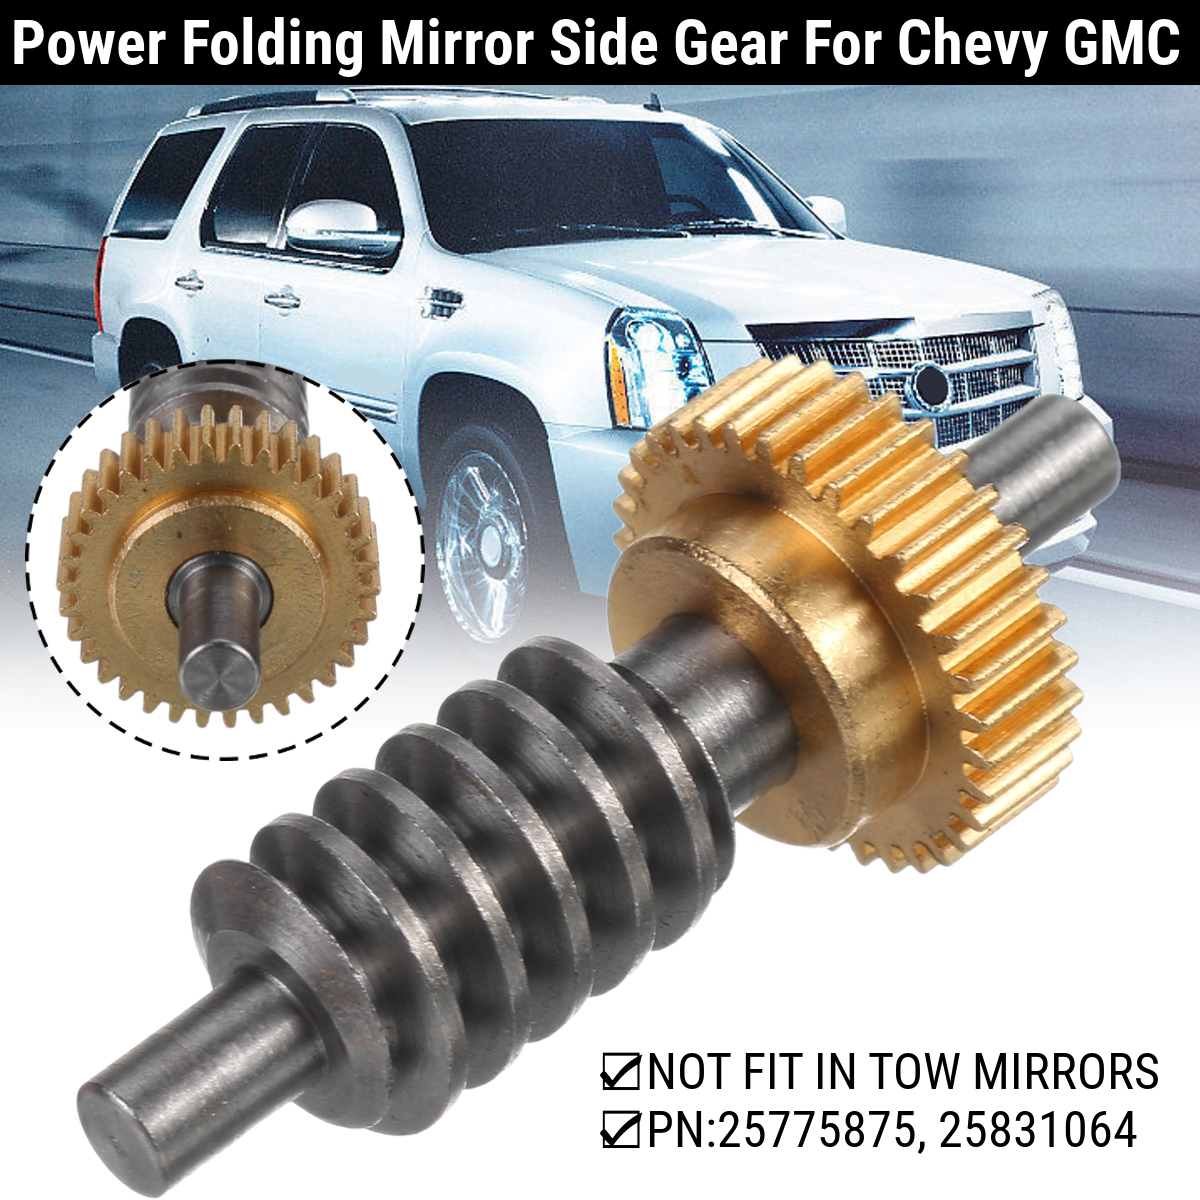 Folding-Mirror-Side-Gear-Left-Or-Right-Power-Side-Gear-For-Chevy-GMC-SUV-Truck-1724162-1